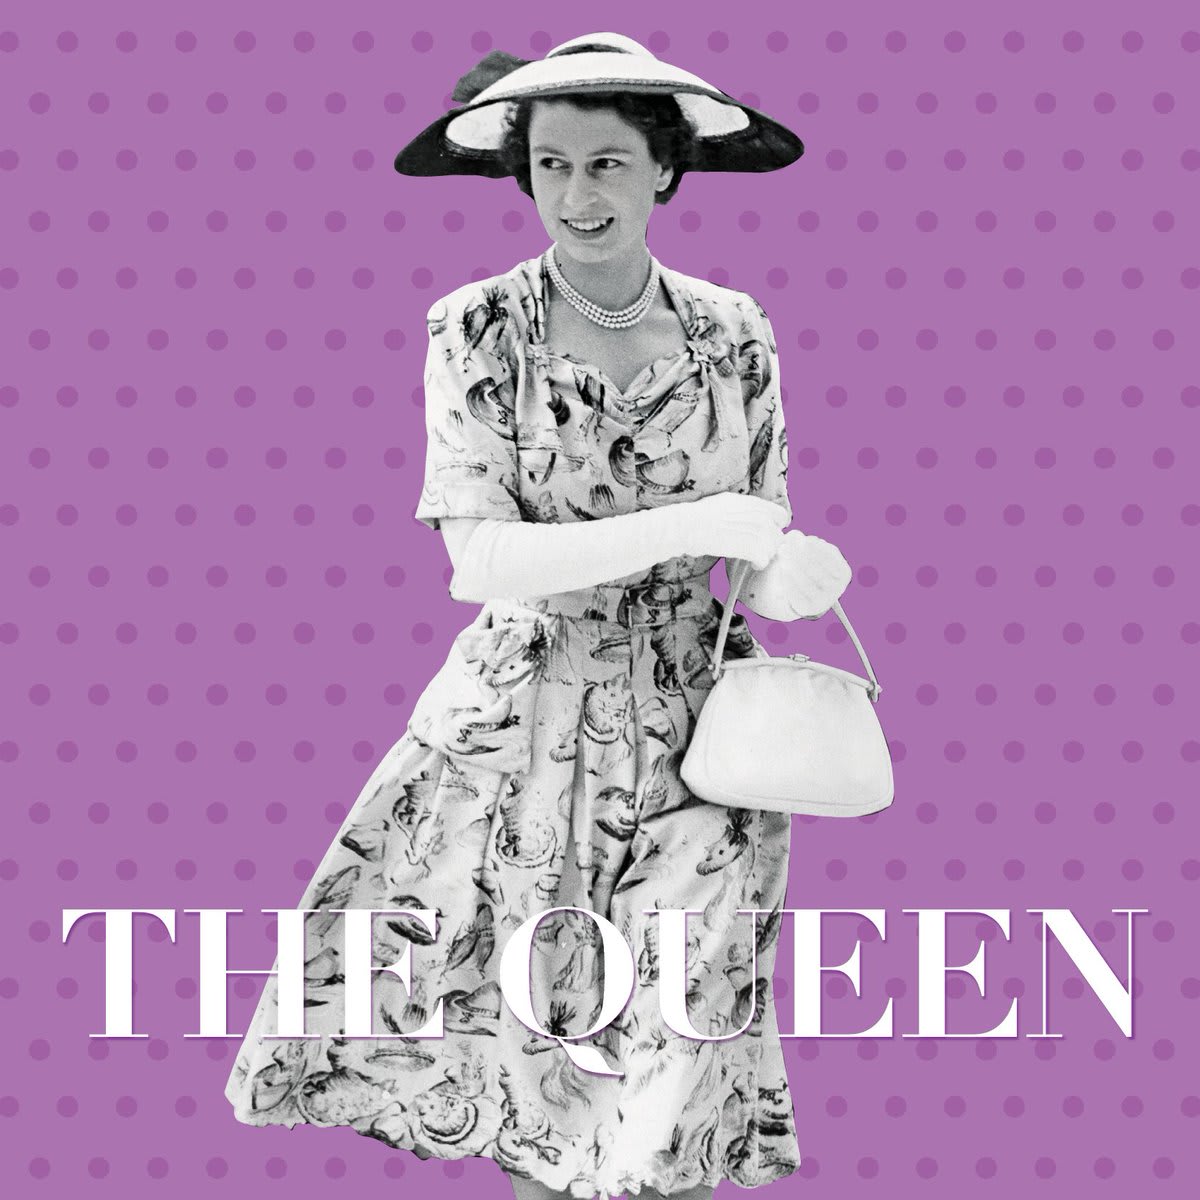 Happy Birthday, Ma'am ✨ Wishing TheQueen a very happy 96th This month we publish Royal correspondant Ian Lloyd's warm and witty biography of Queen ElizabethII in time for the #PlatinumJubilee. https://t.co/IKEKgzDJA7